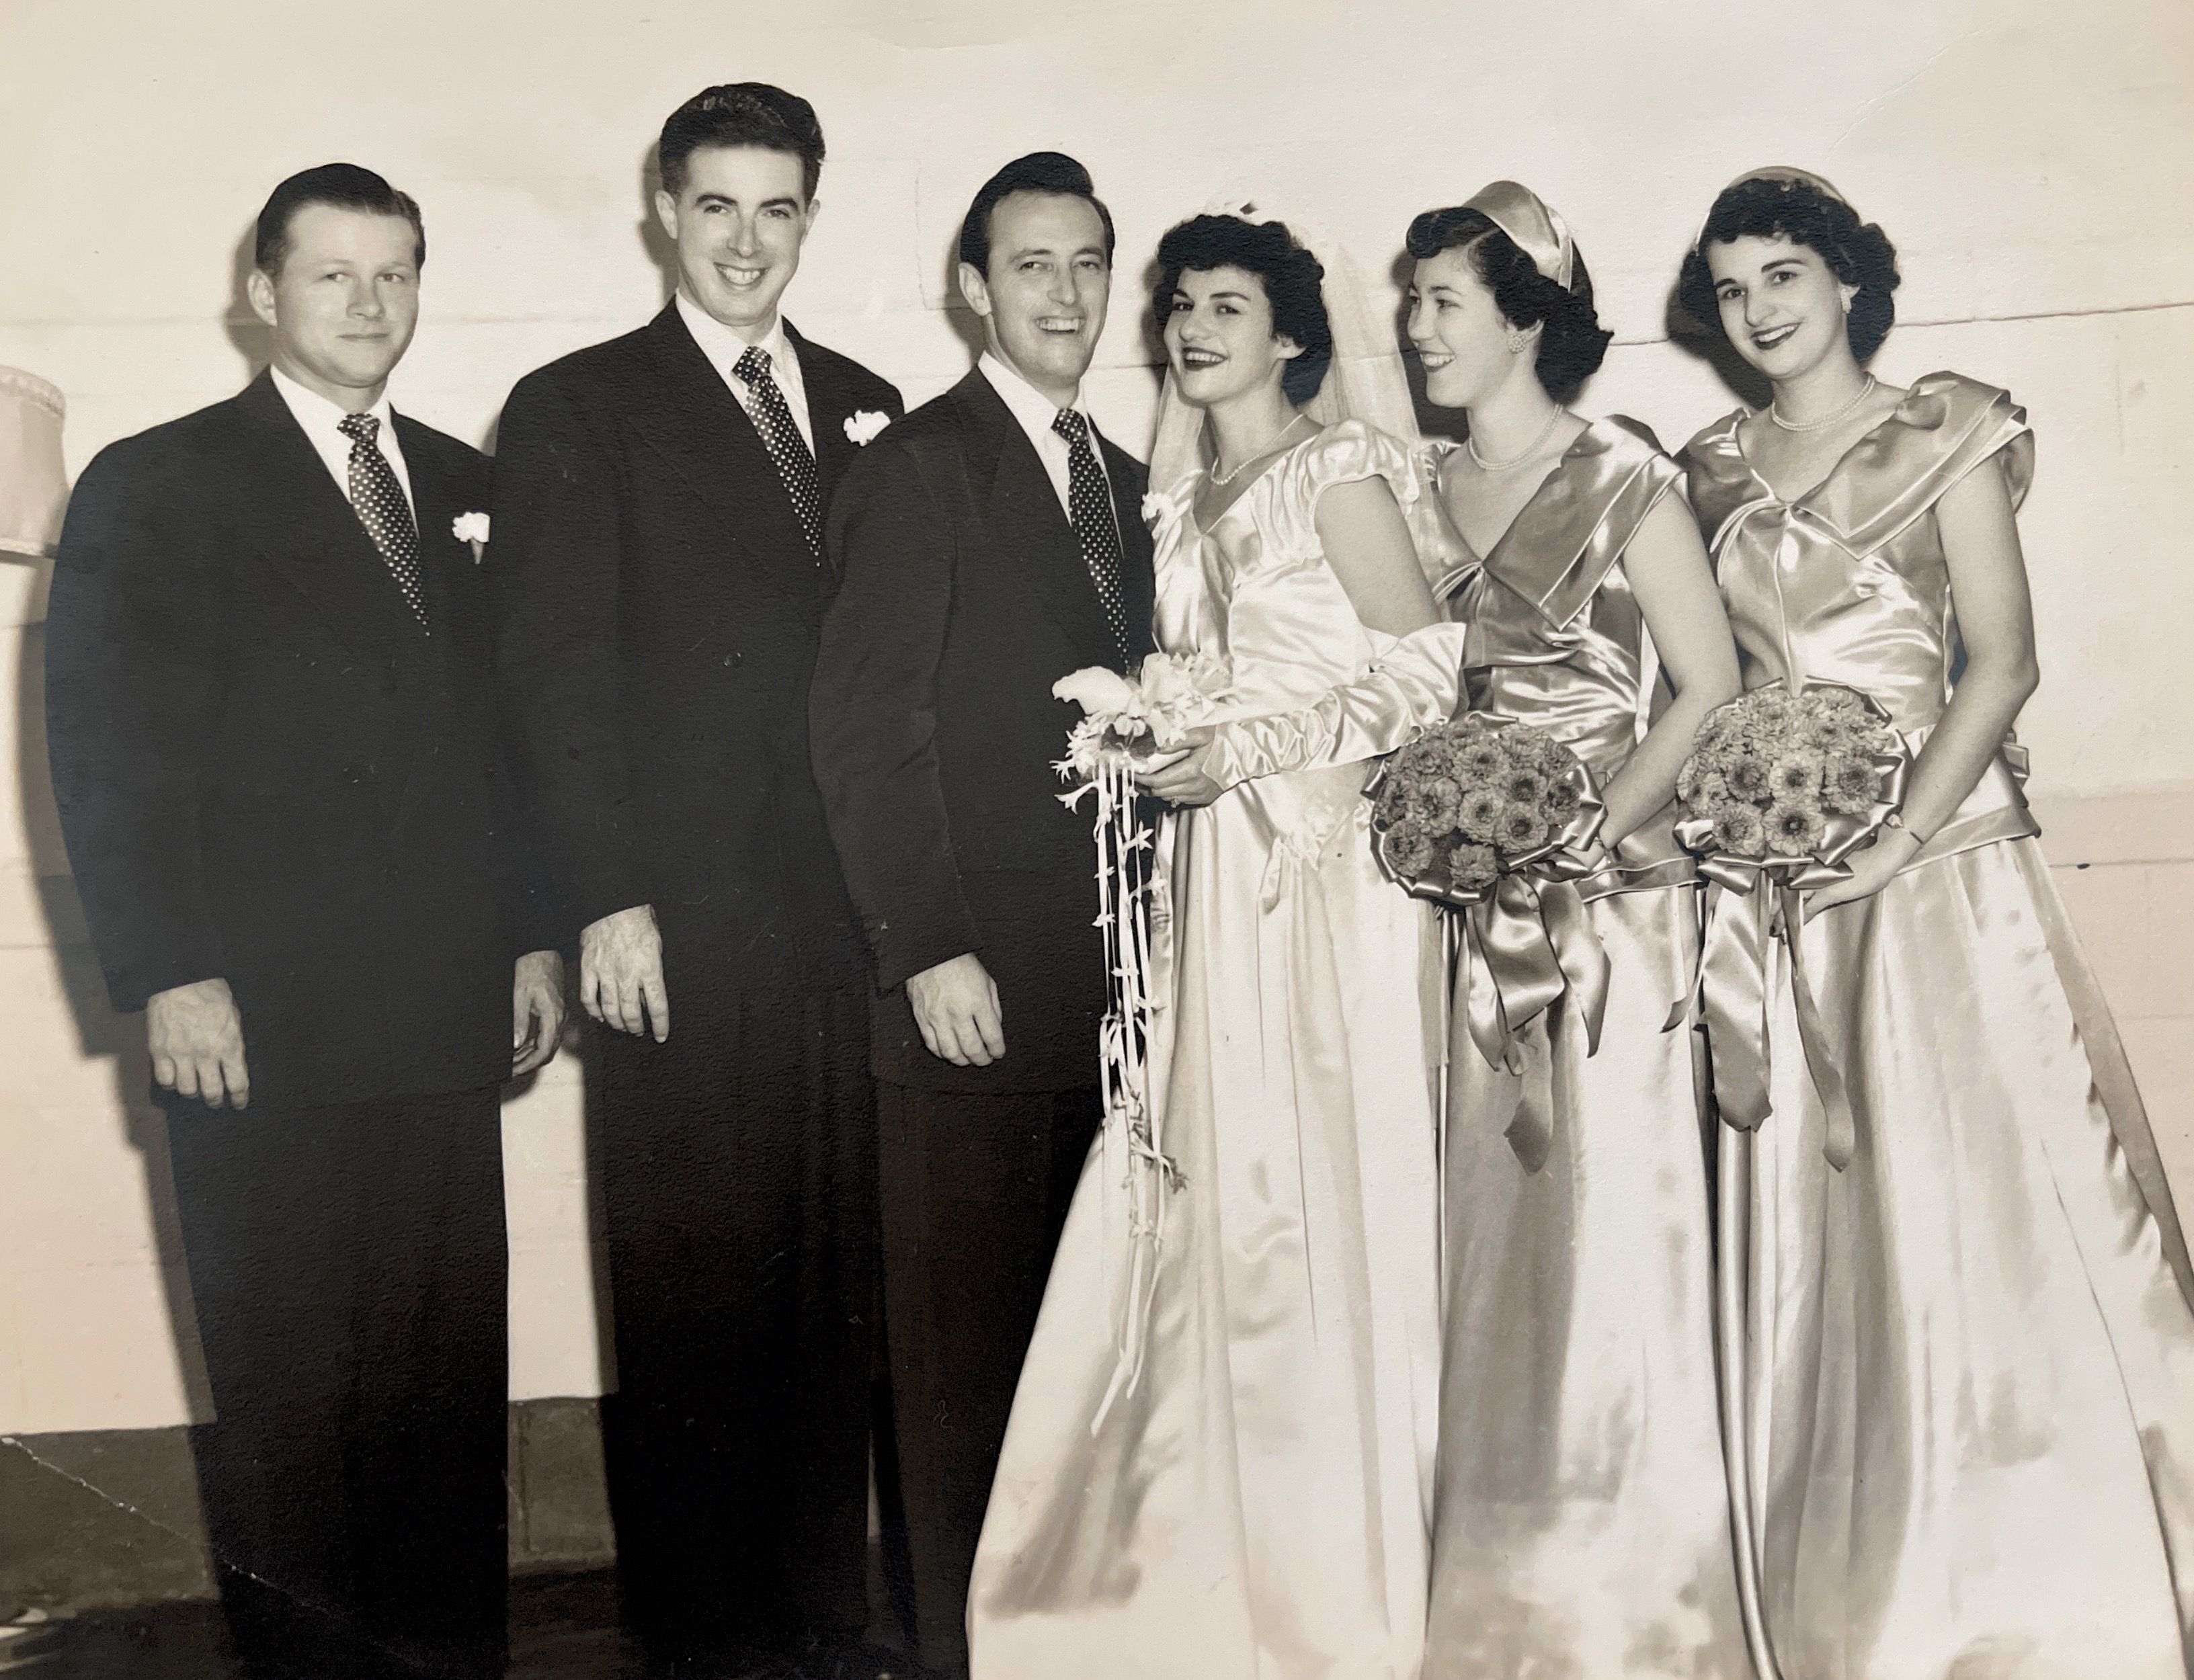 Charles Andrew Nick & Norma Lane Kraus        Married on October 8, 1949.